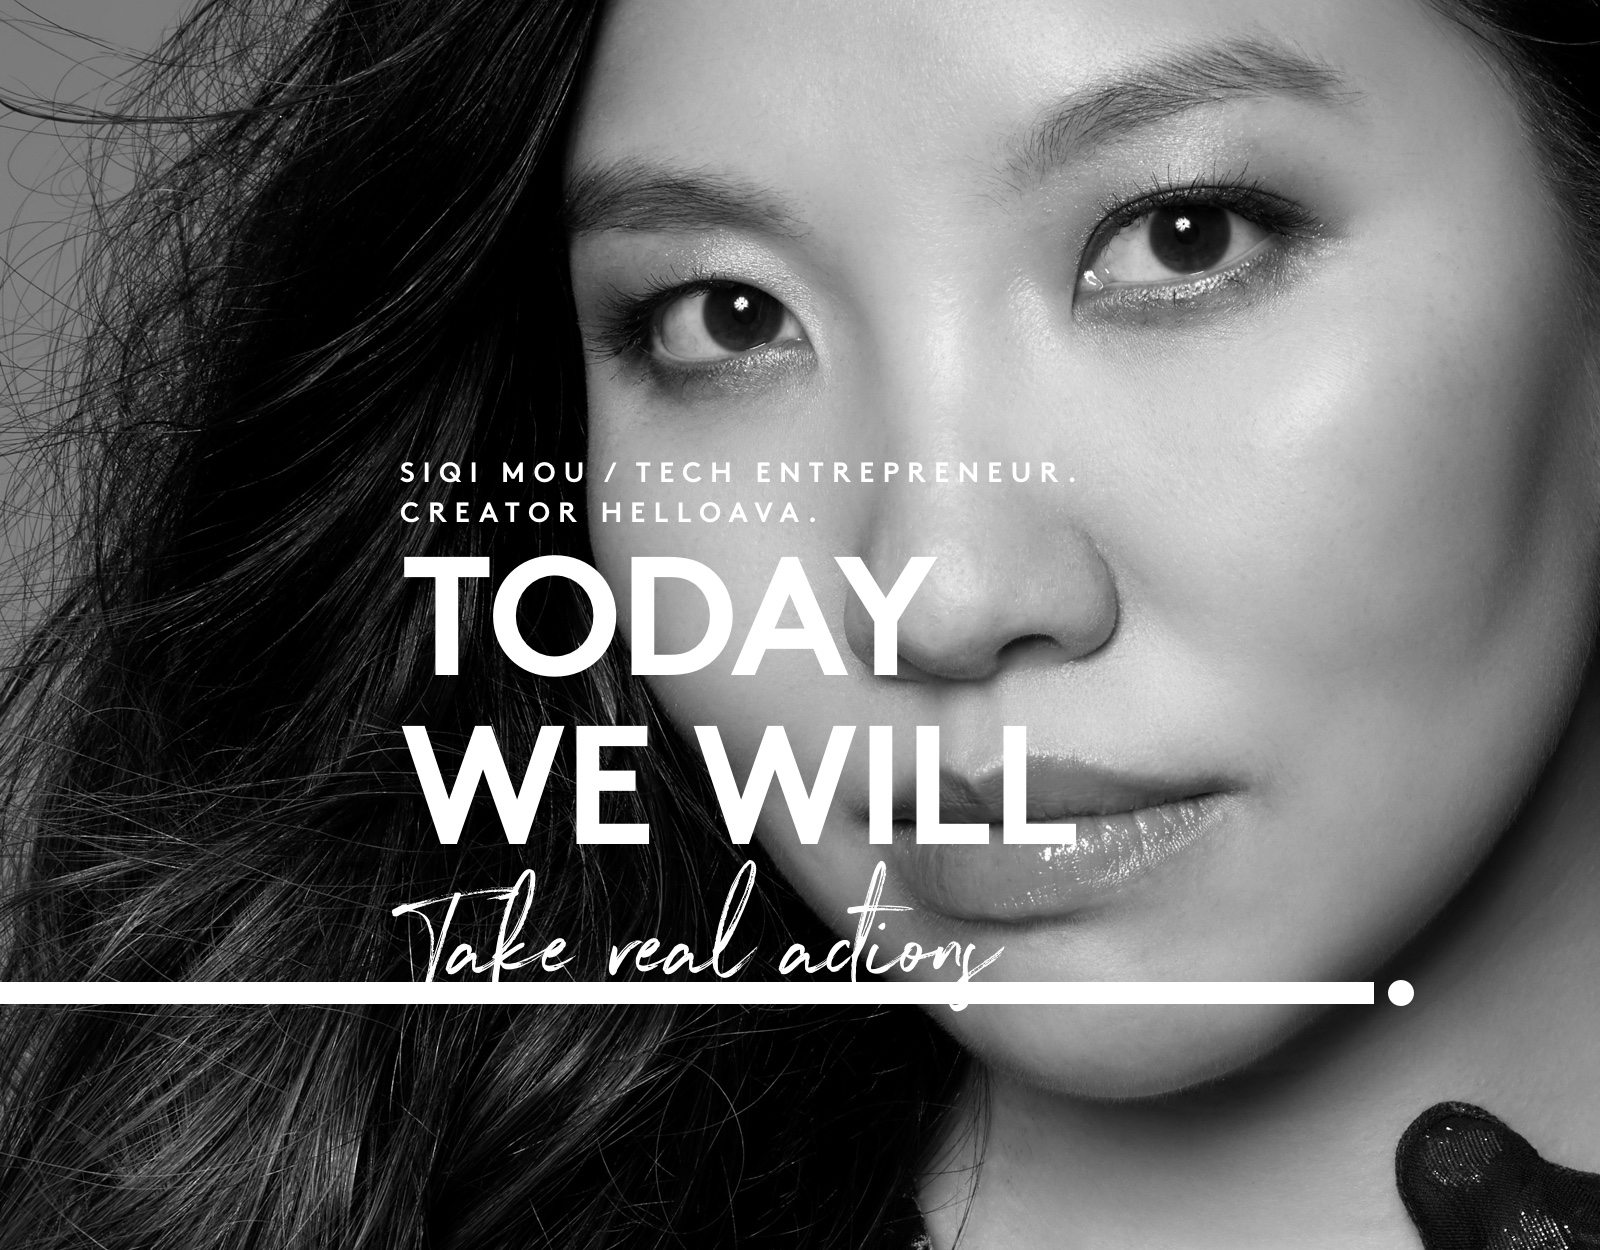 SIQI MOU  TECH ENTREPRENEUR. CREATOR HELLOAVA.  TODAY WE WILL TAKE REAL ACTIONS. 